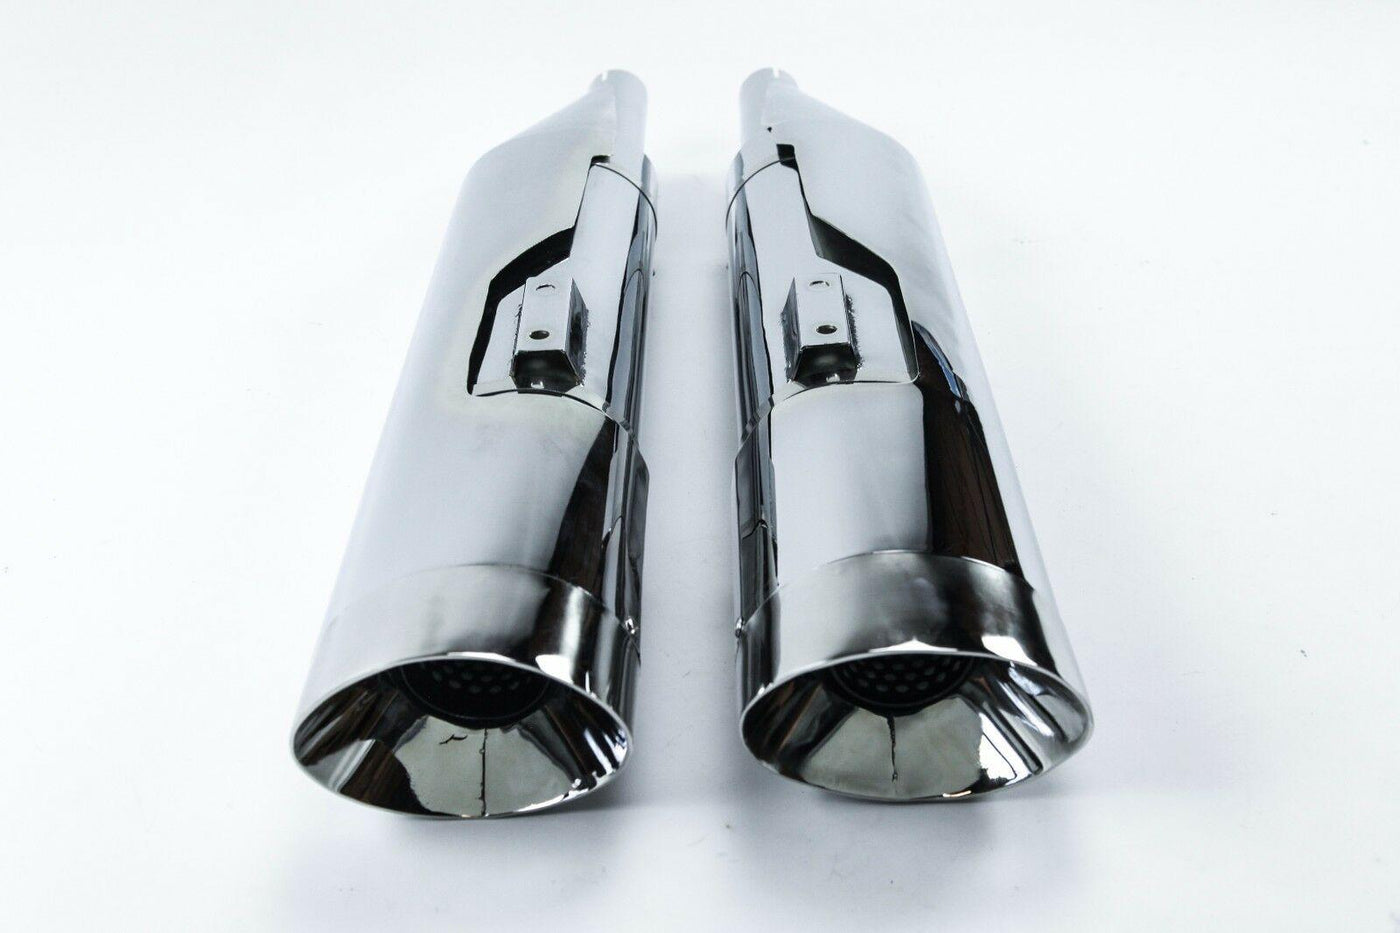 Monster  Slip-On Mufflers Harley Davidson Oval Exhaust Pipes Touring Glide - Moto Life Products